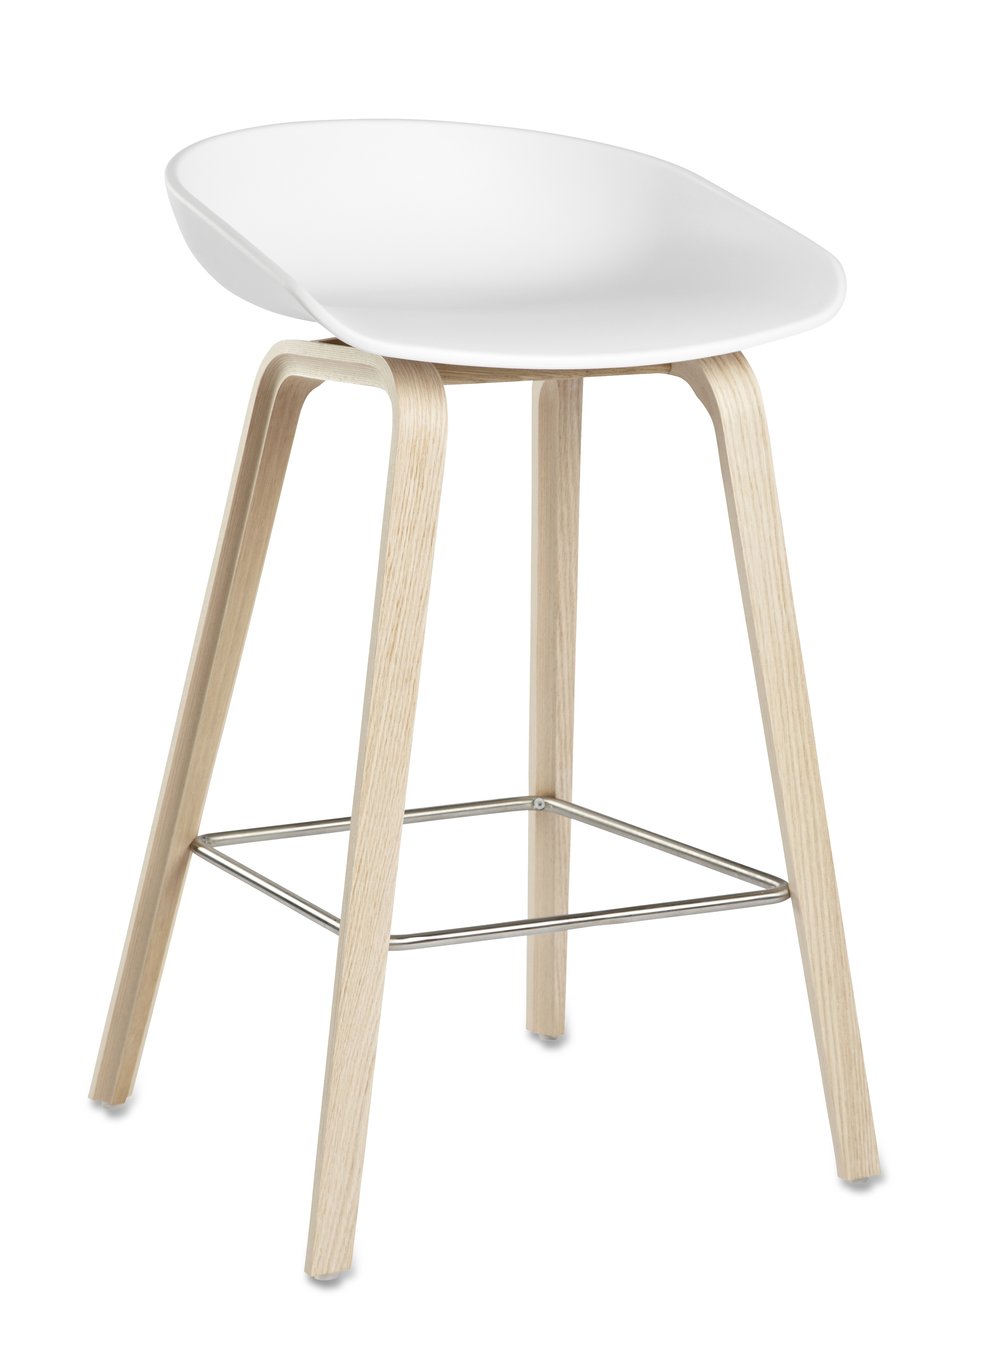 AAS32 About A Stool.jpg